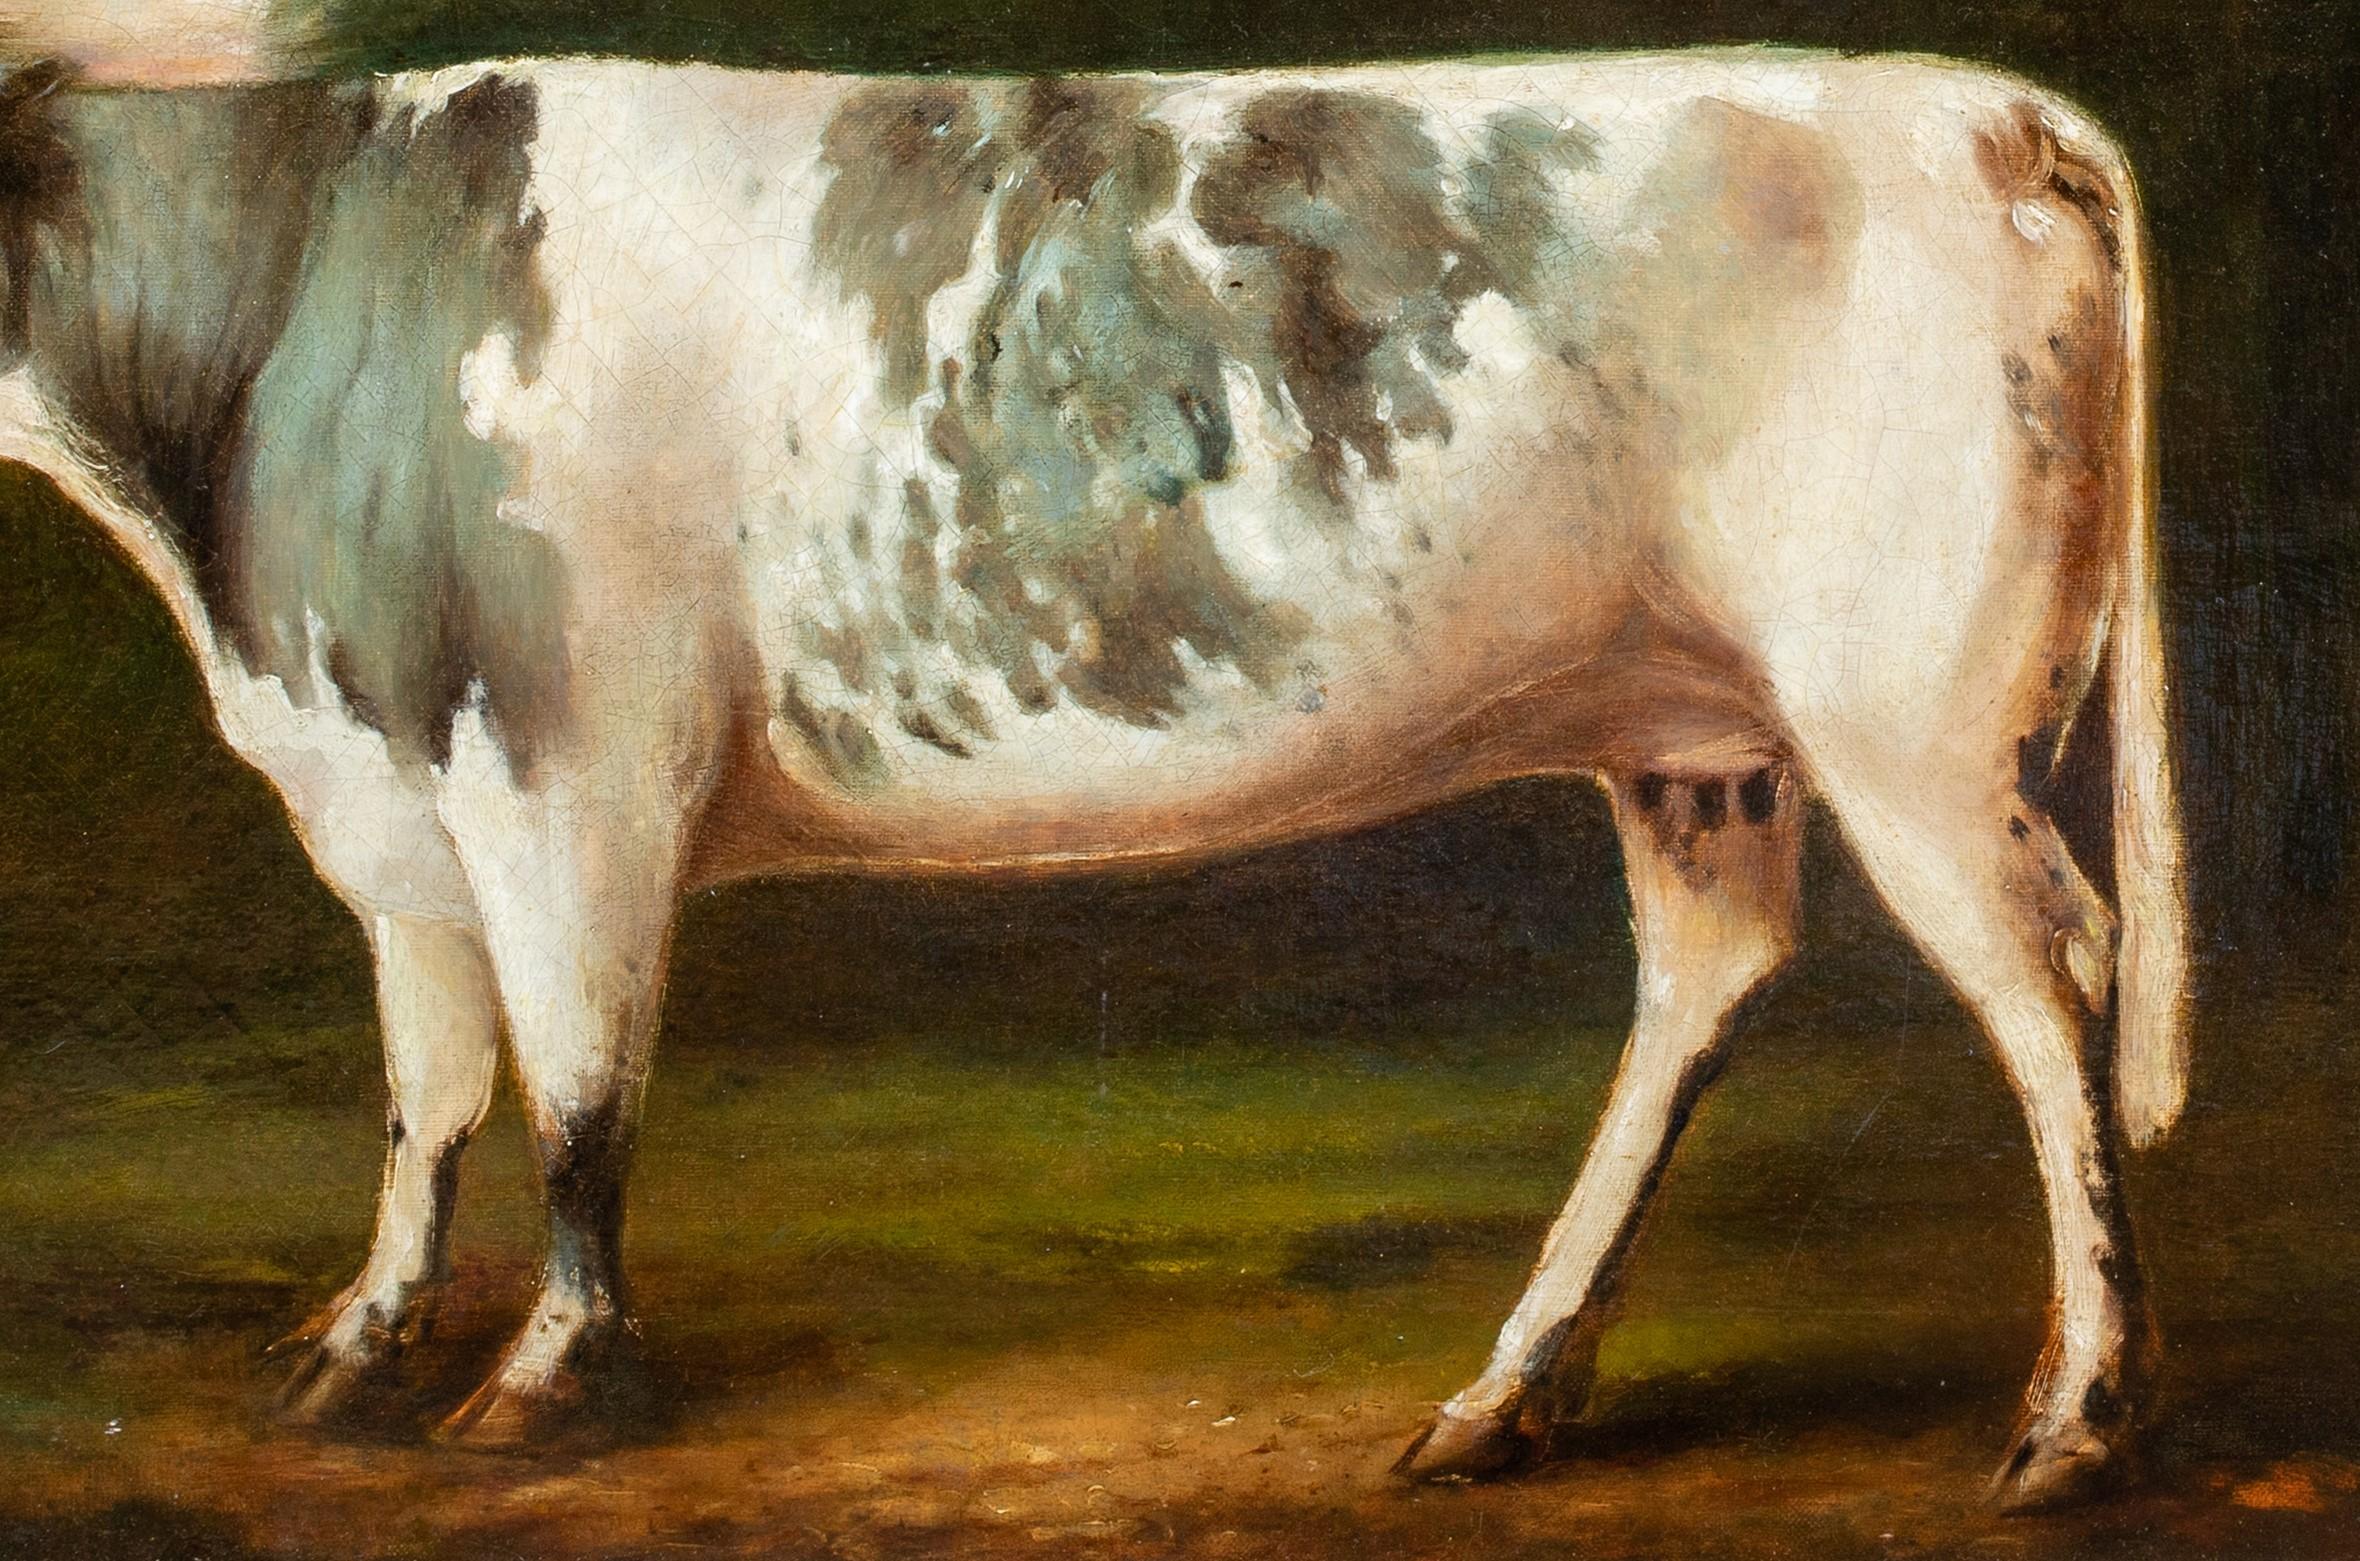 Portrait Of A Prize Holstein Friesian Cow, circa 1800

Early & Rare British School Study

Large circa 1800 British School portrait of a prize Holstein Friesian Cow in a field, oil on canvas. Excellent quality and condition rare early study of the